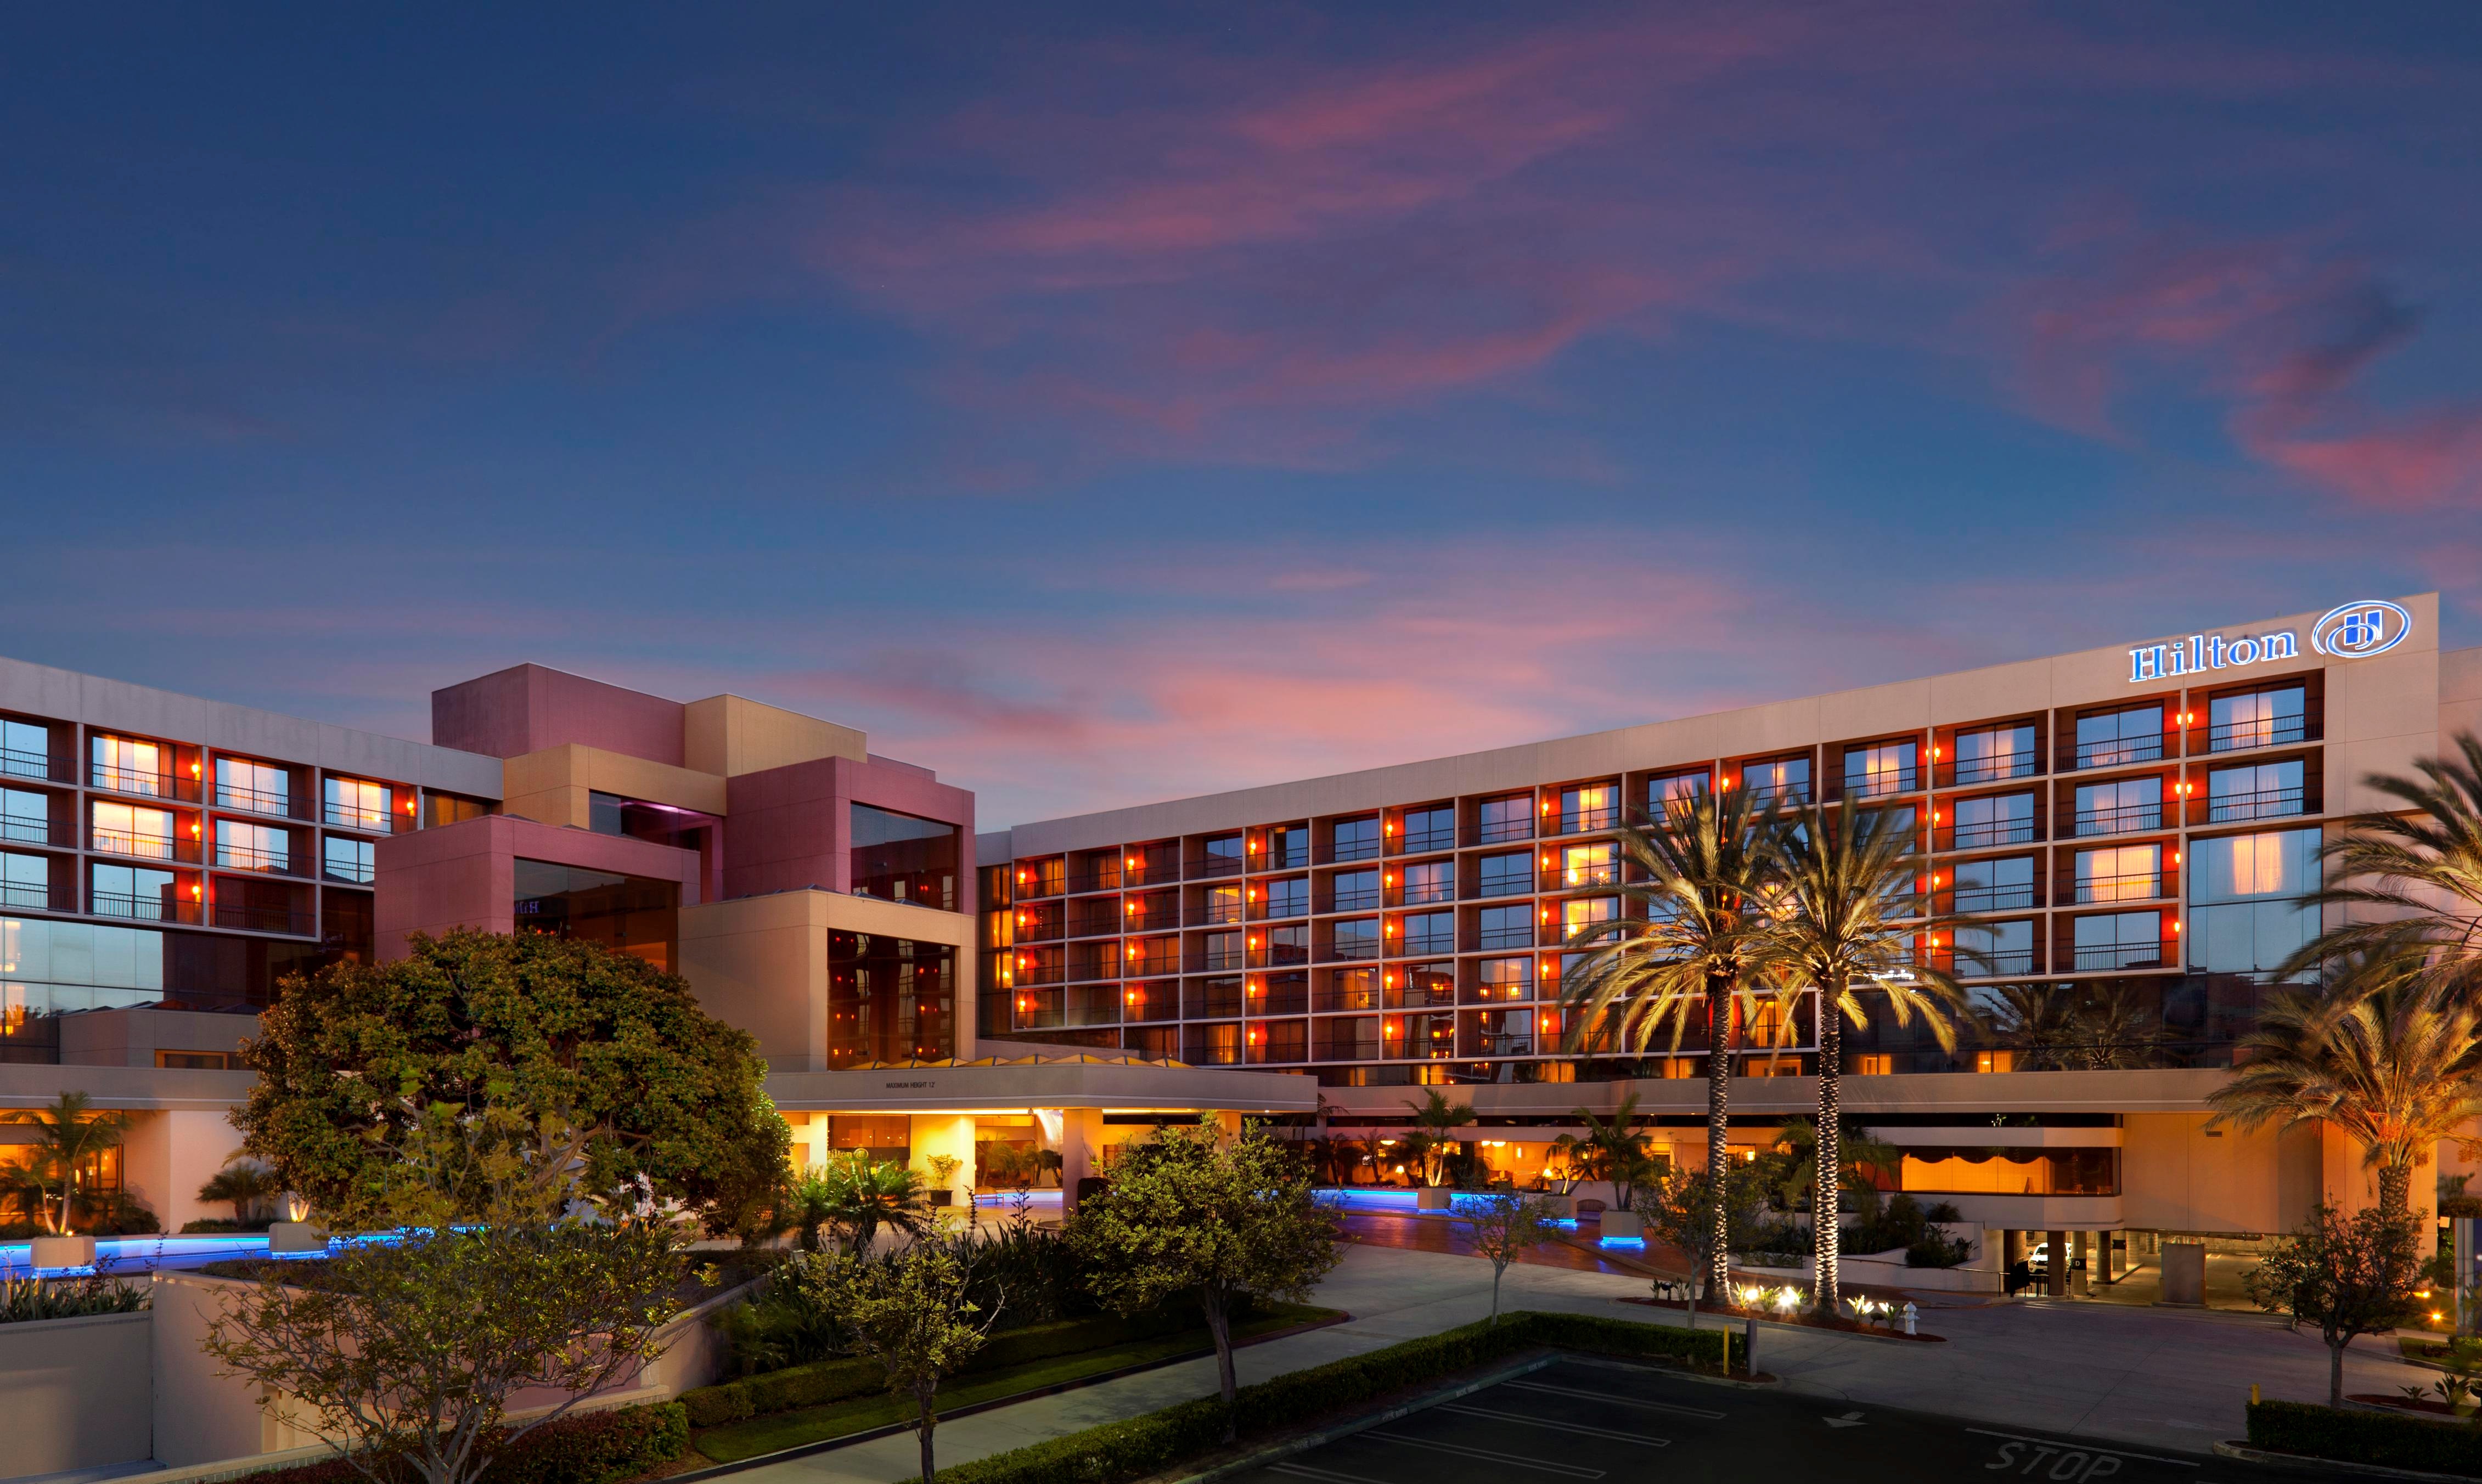 The conference will be held at the Hilton Orange County/Costa Mesa